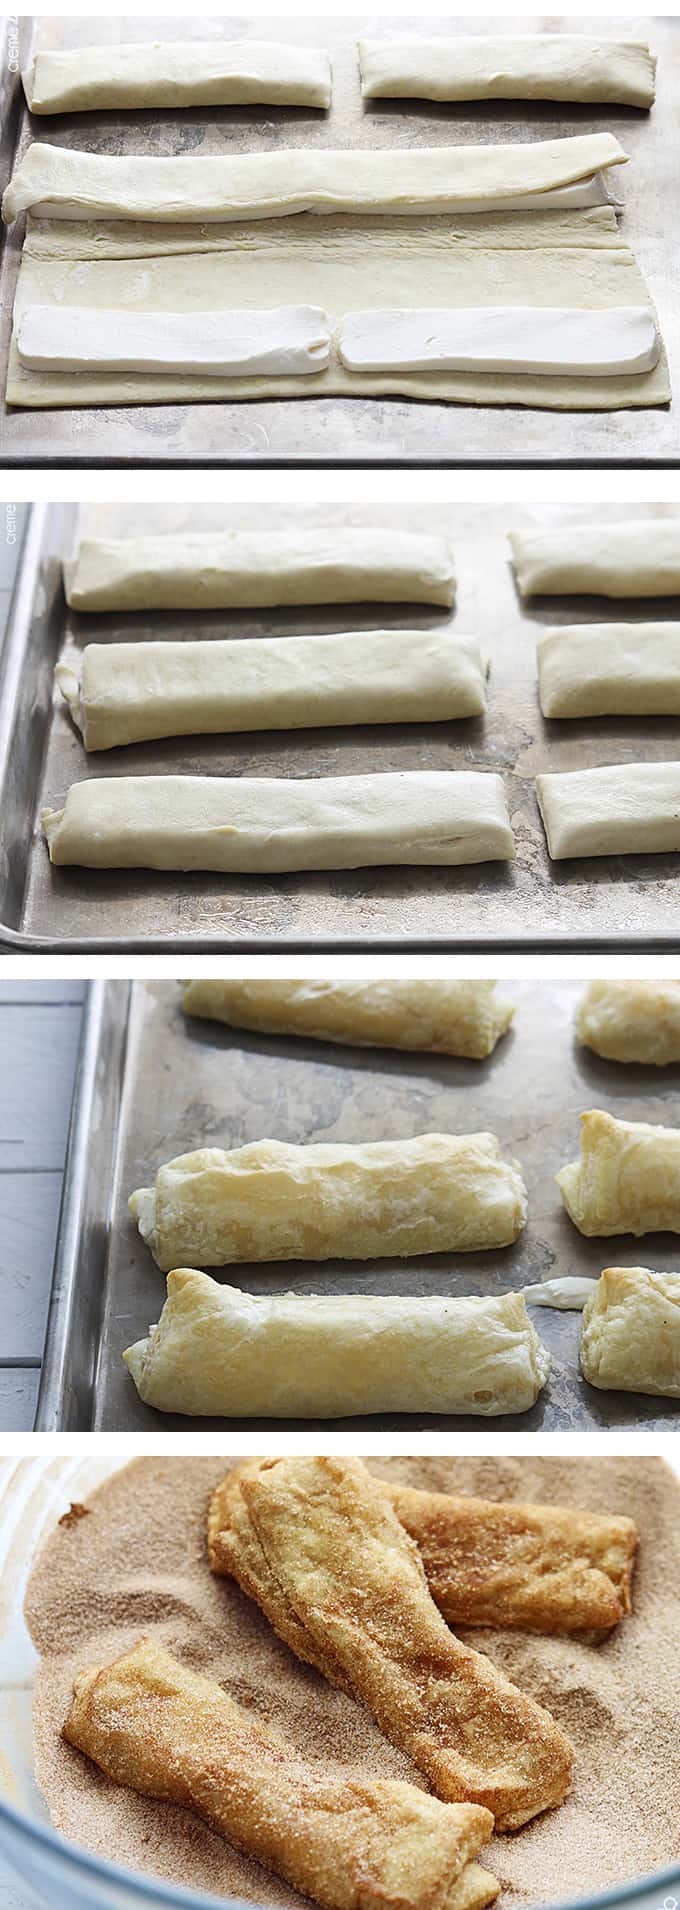 four images of dough being rolled baked and dipped in cinnamon.